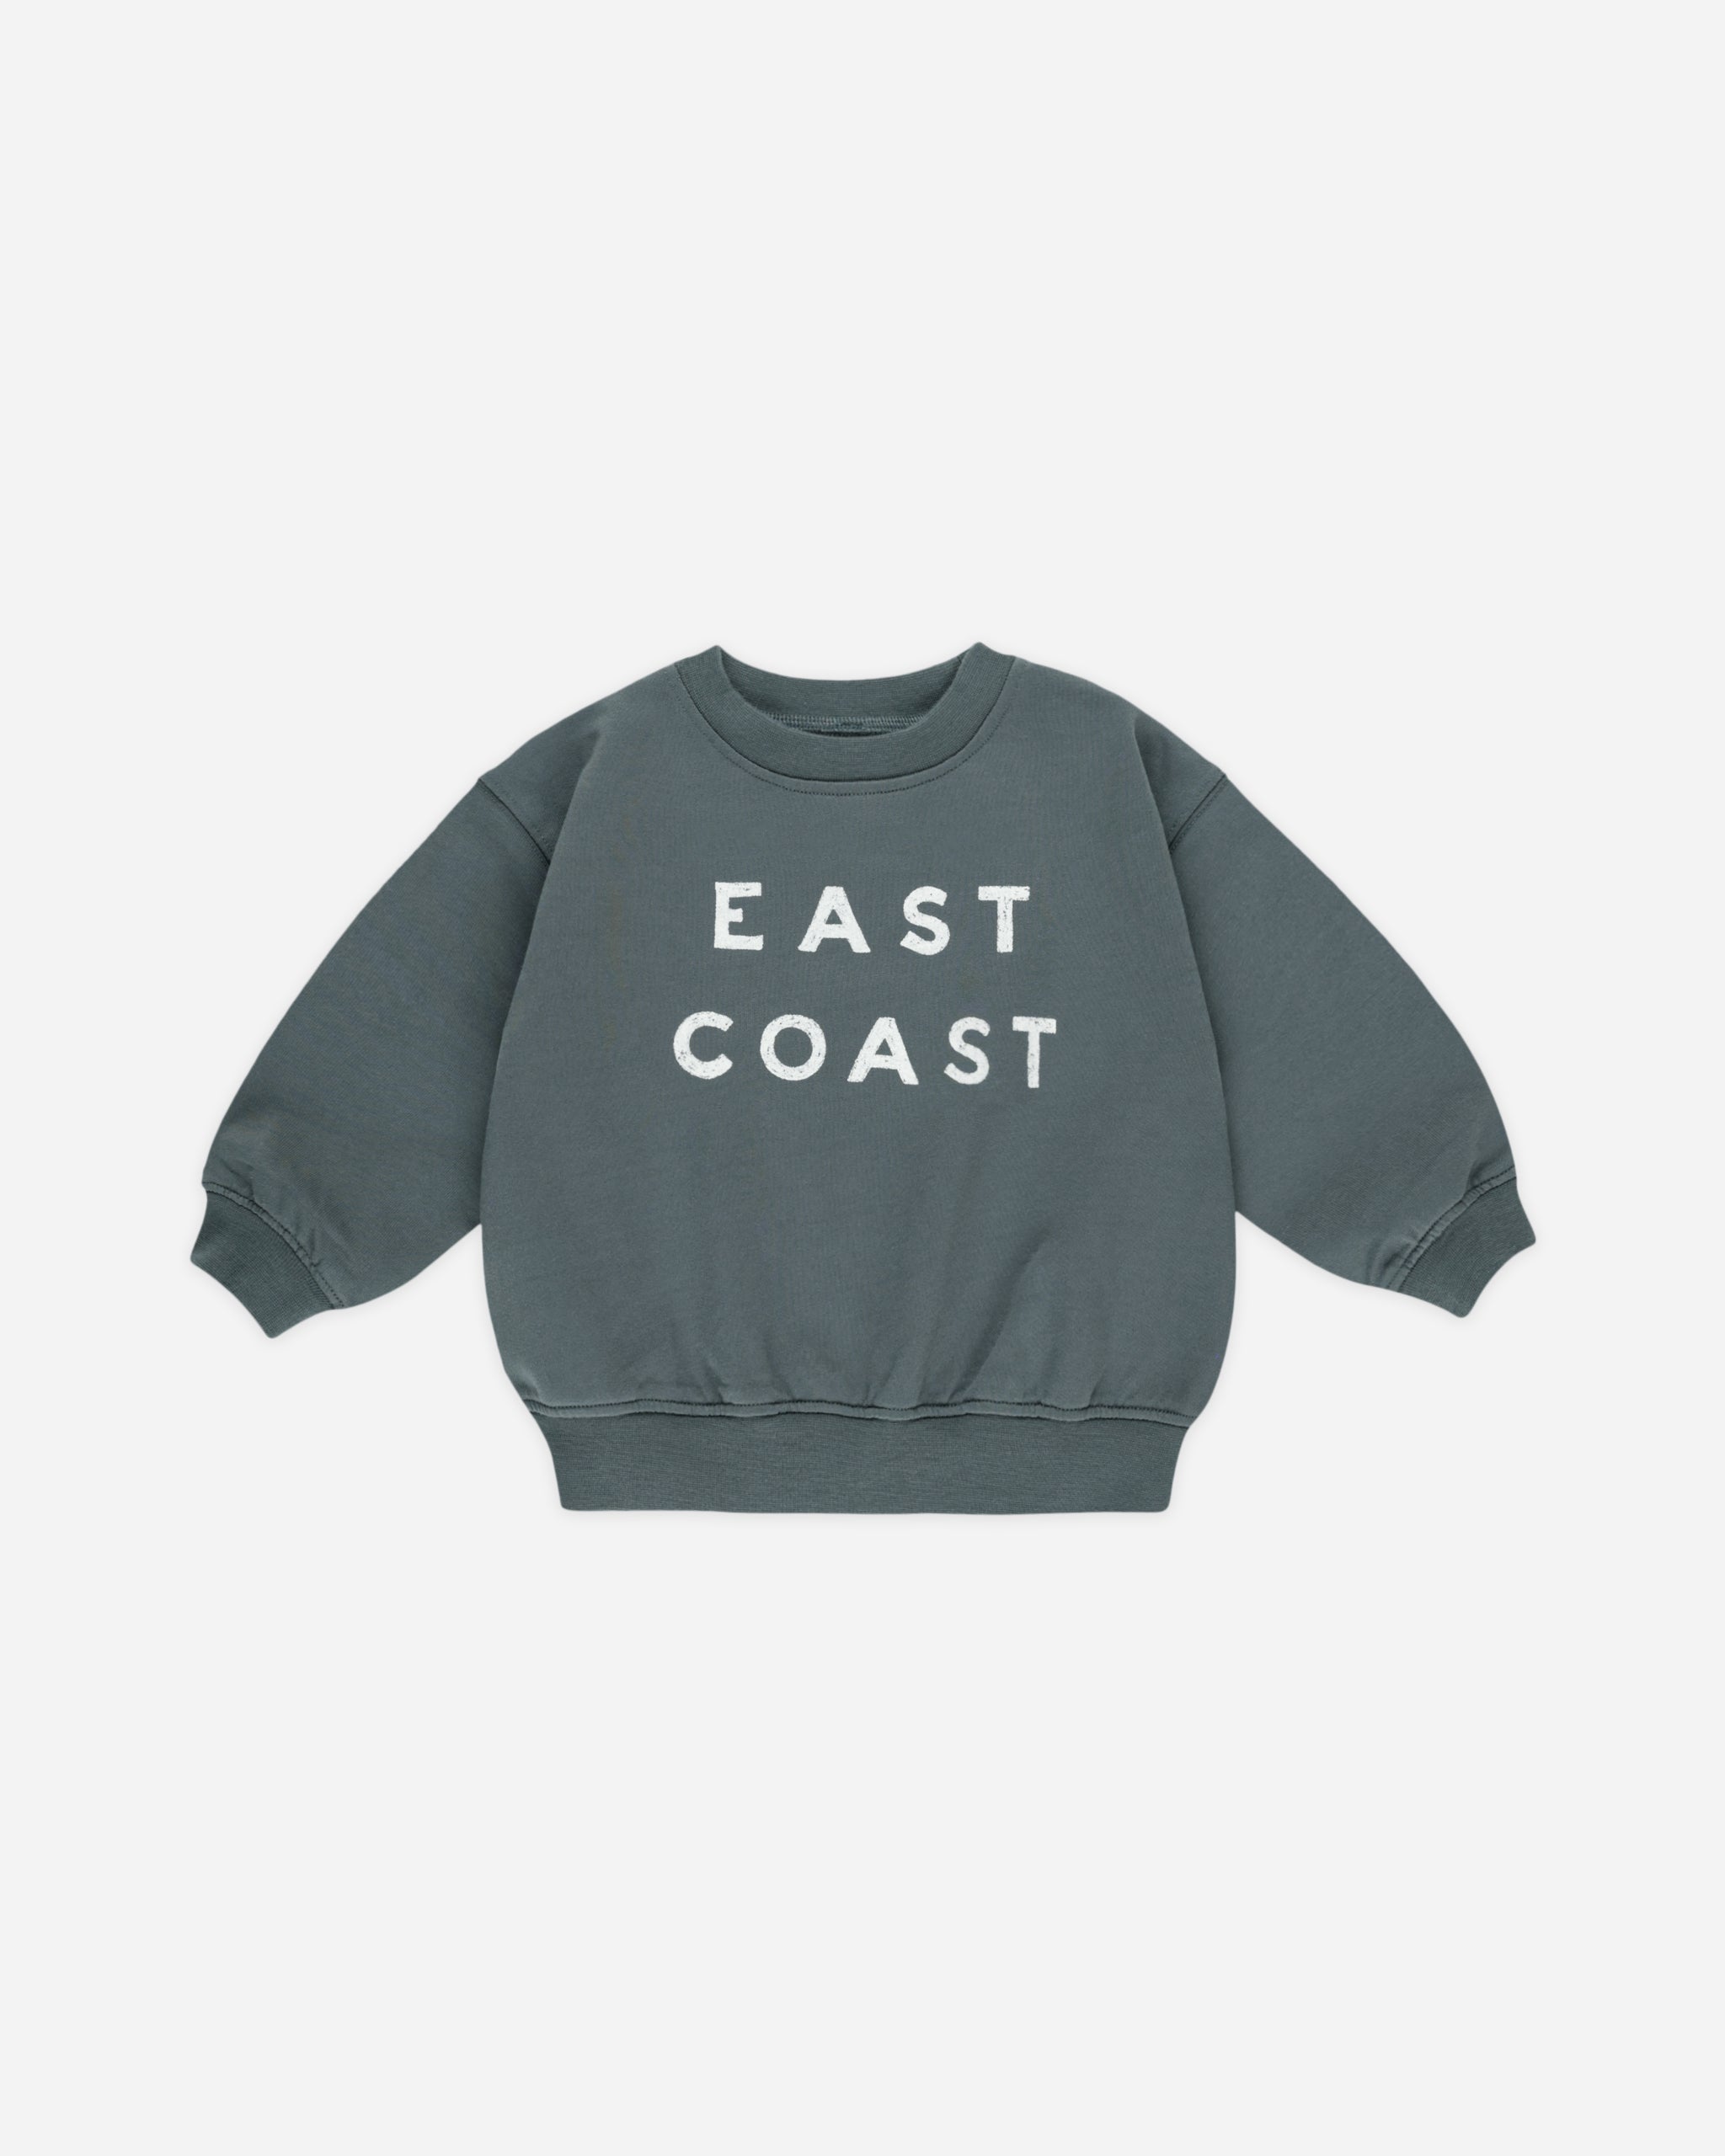 Sweatshirt || East Coast - Rylee + Cru | Kids Clothes | Trendy Baby Clothes | Modern Infant Outfits |